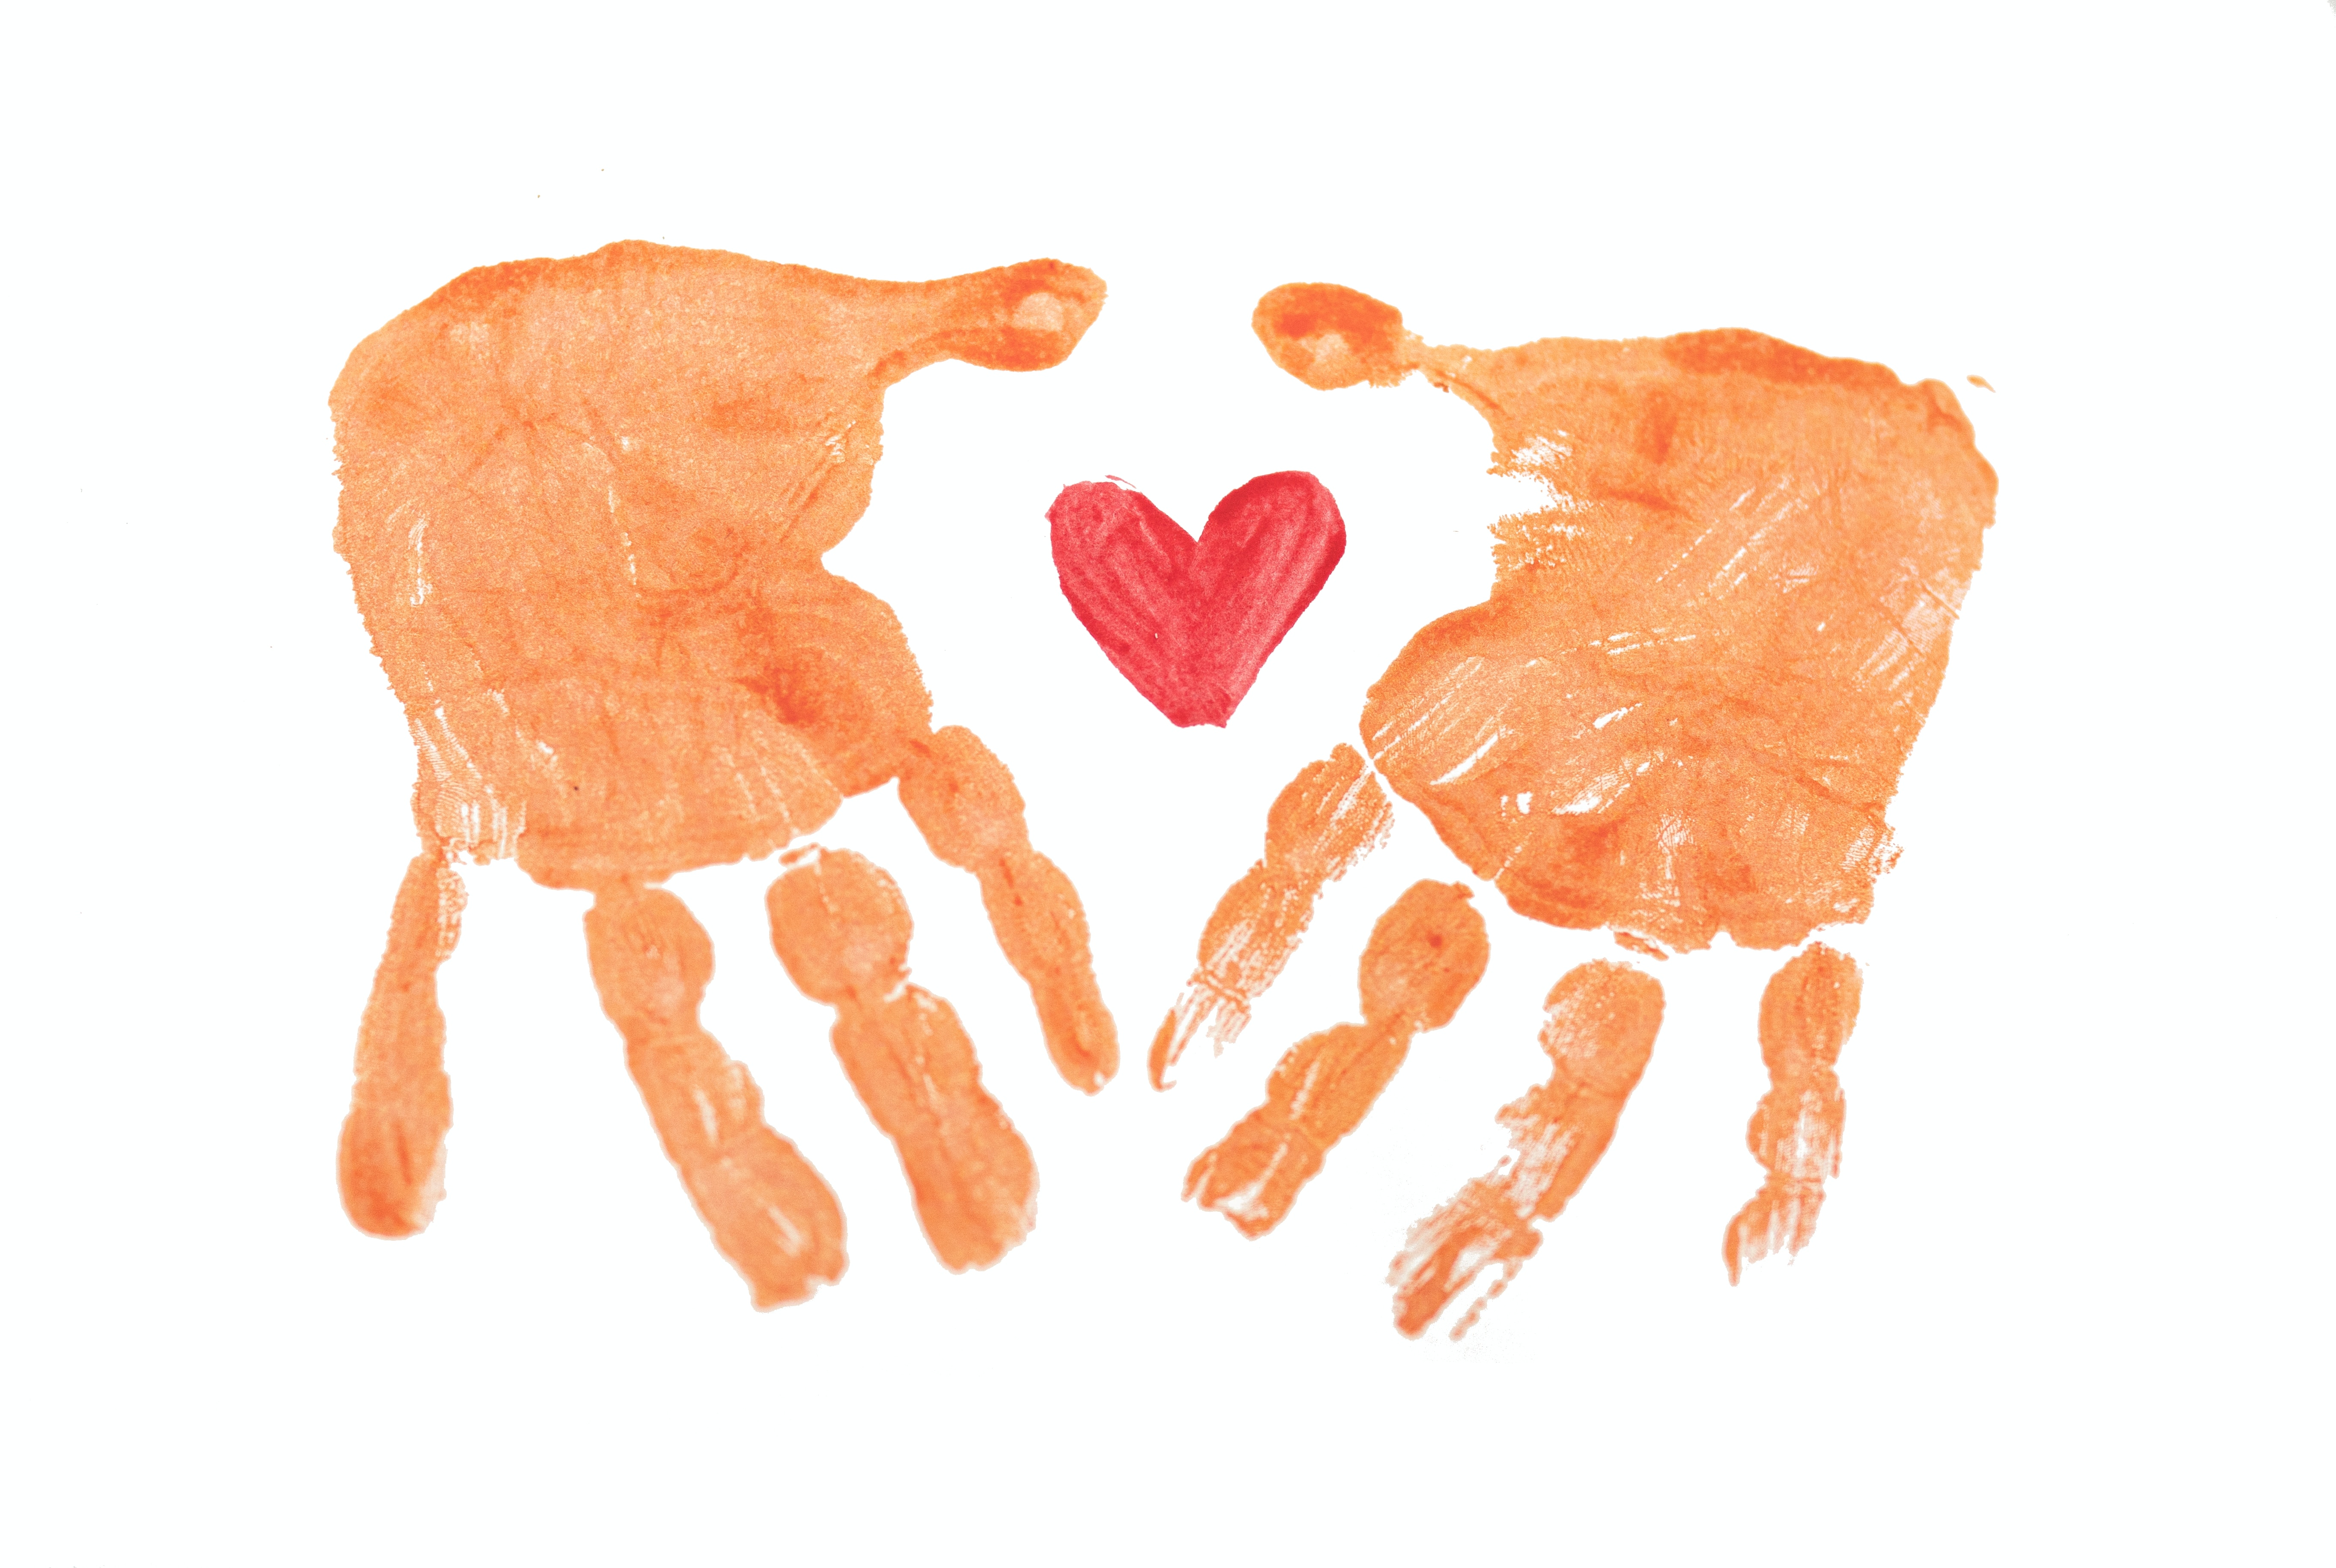 Hands with heart